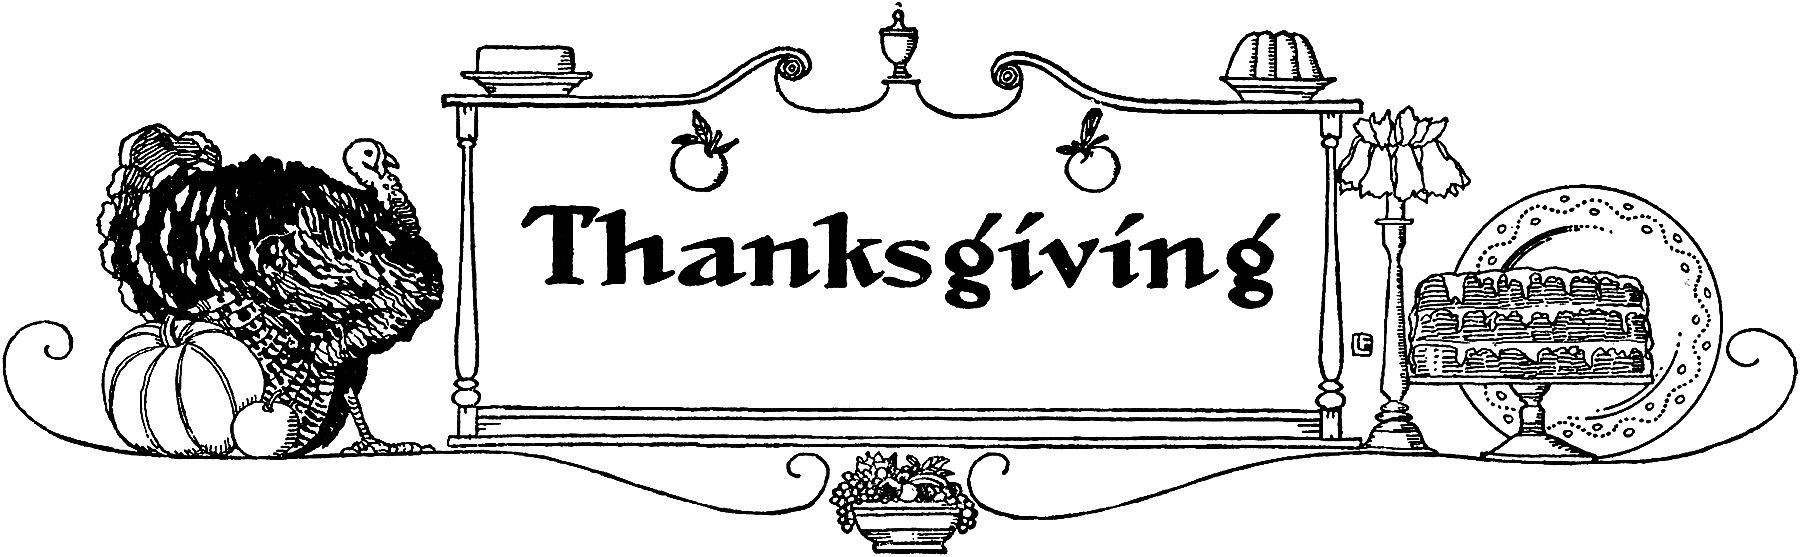 30+ Free Thanksgiving Coloring Pages For Adults &Amp; Kids